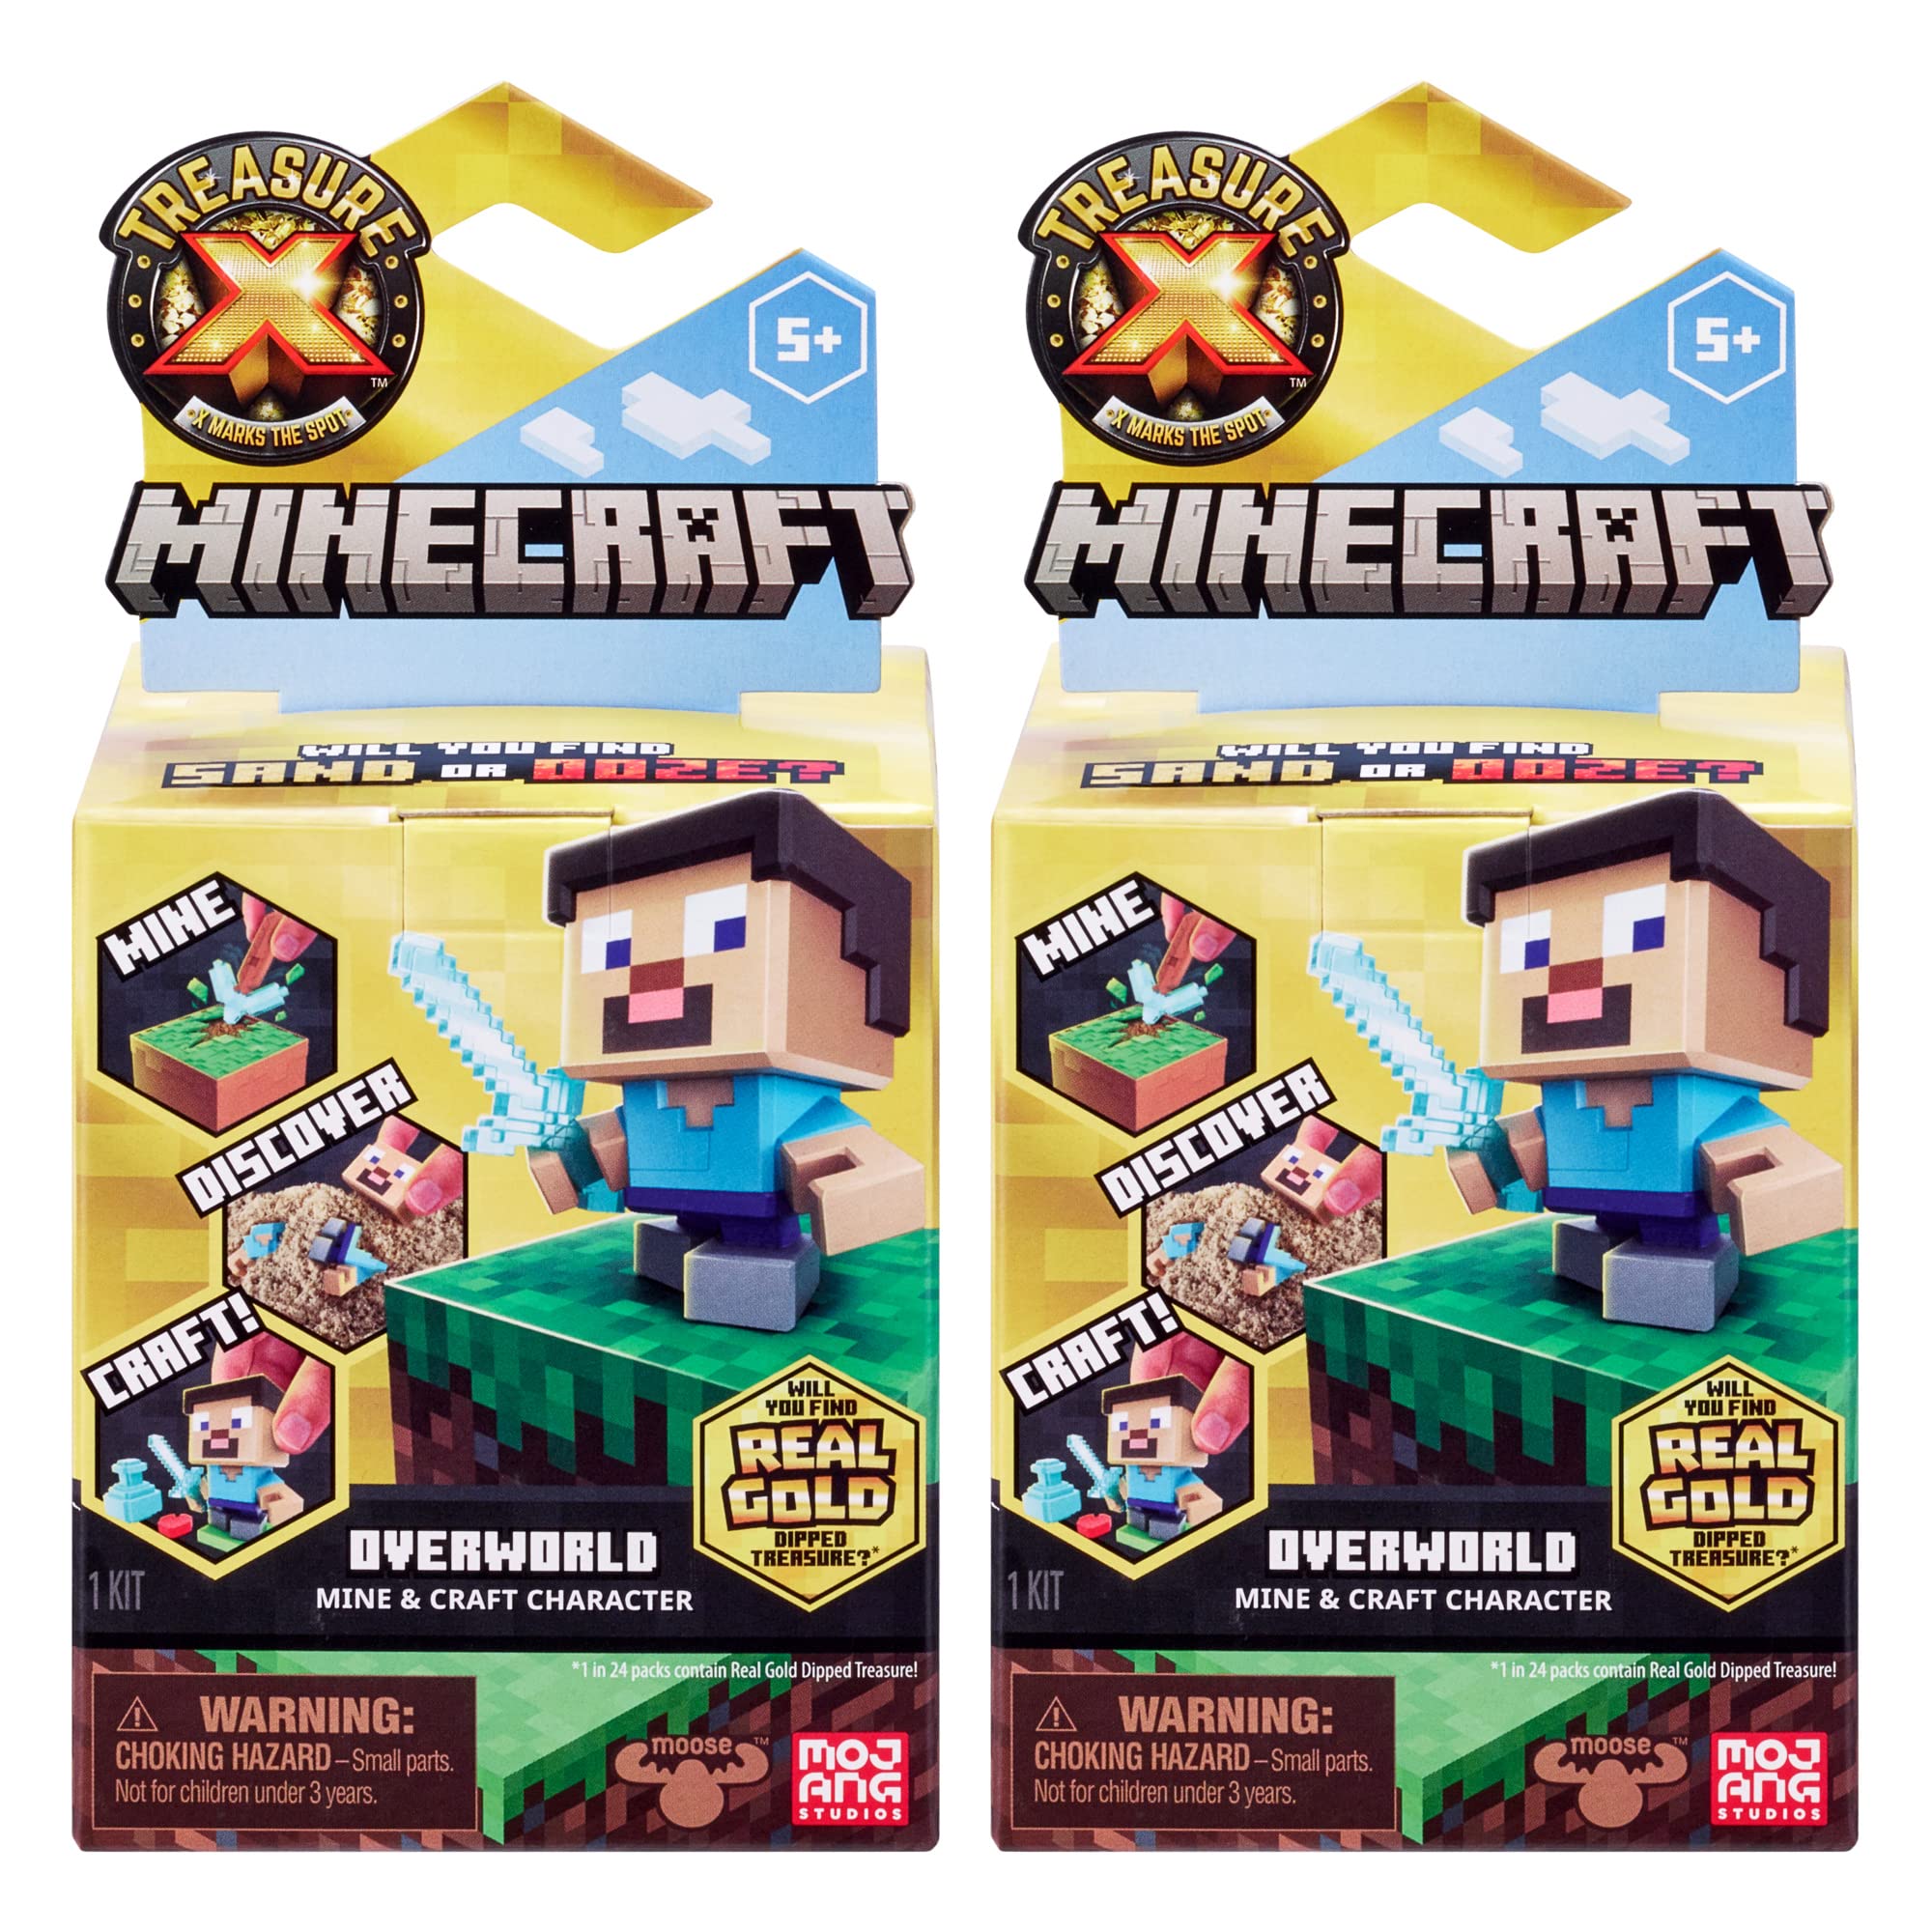 Treasure X Minecraft. Mine, Discover & Craft with 10 Levels of Adventure & 12 Mine & Craft Characters to Collect. Will You find The Real Gold Dipped Treasure?